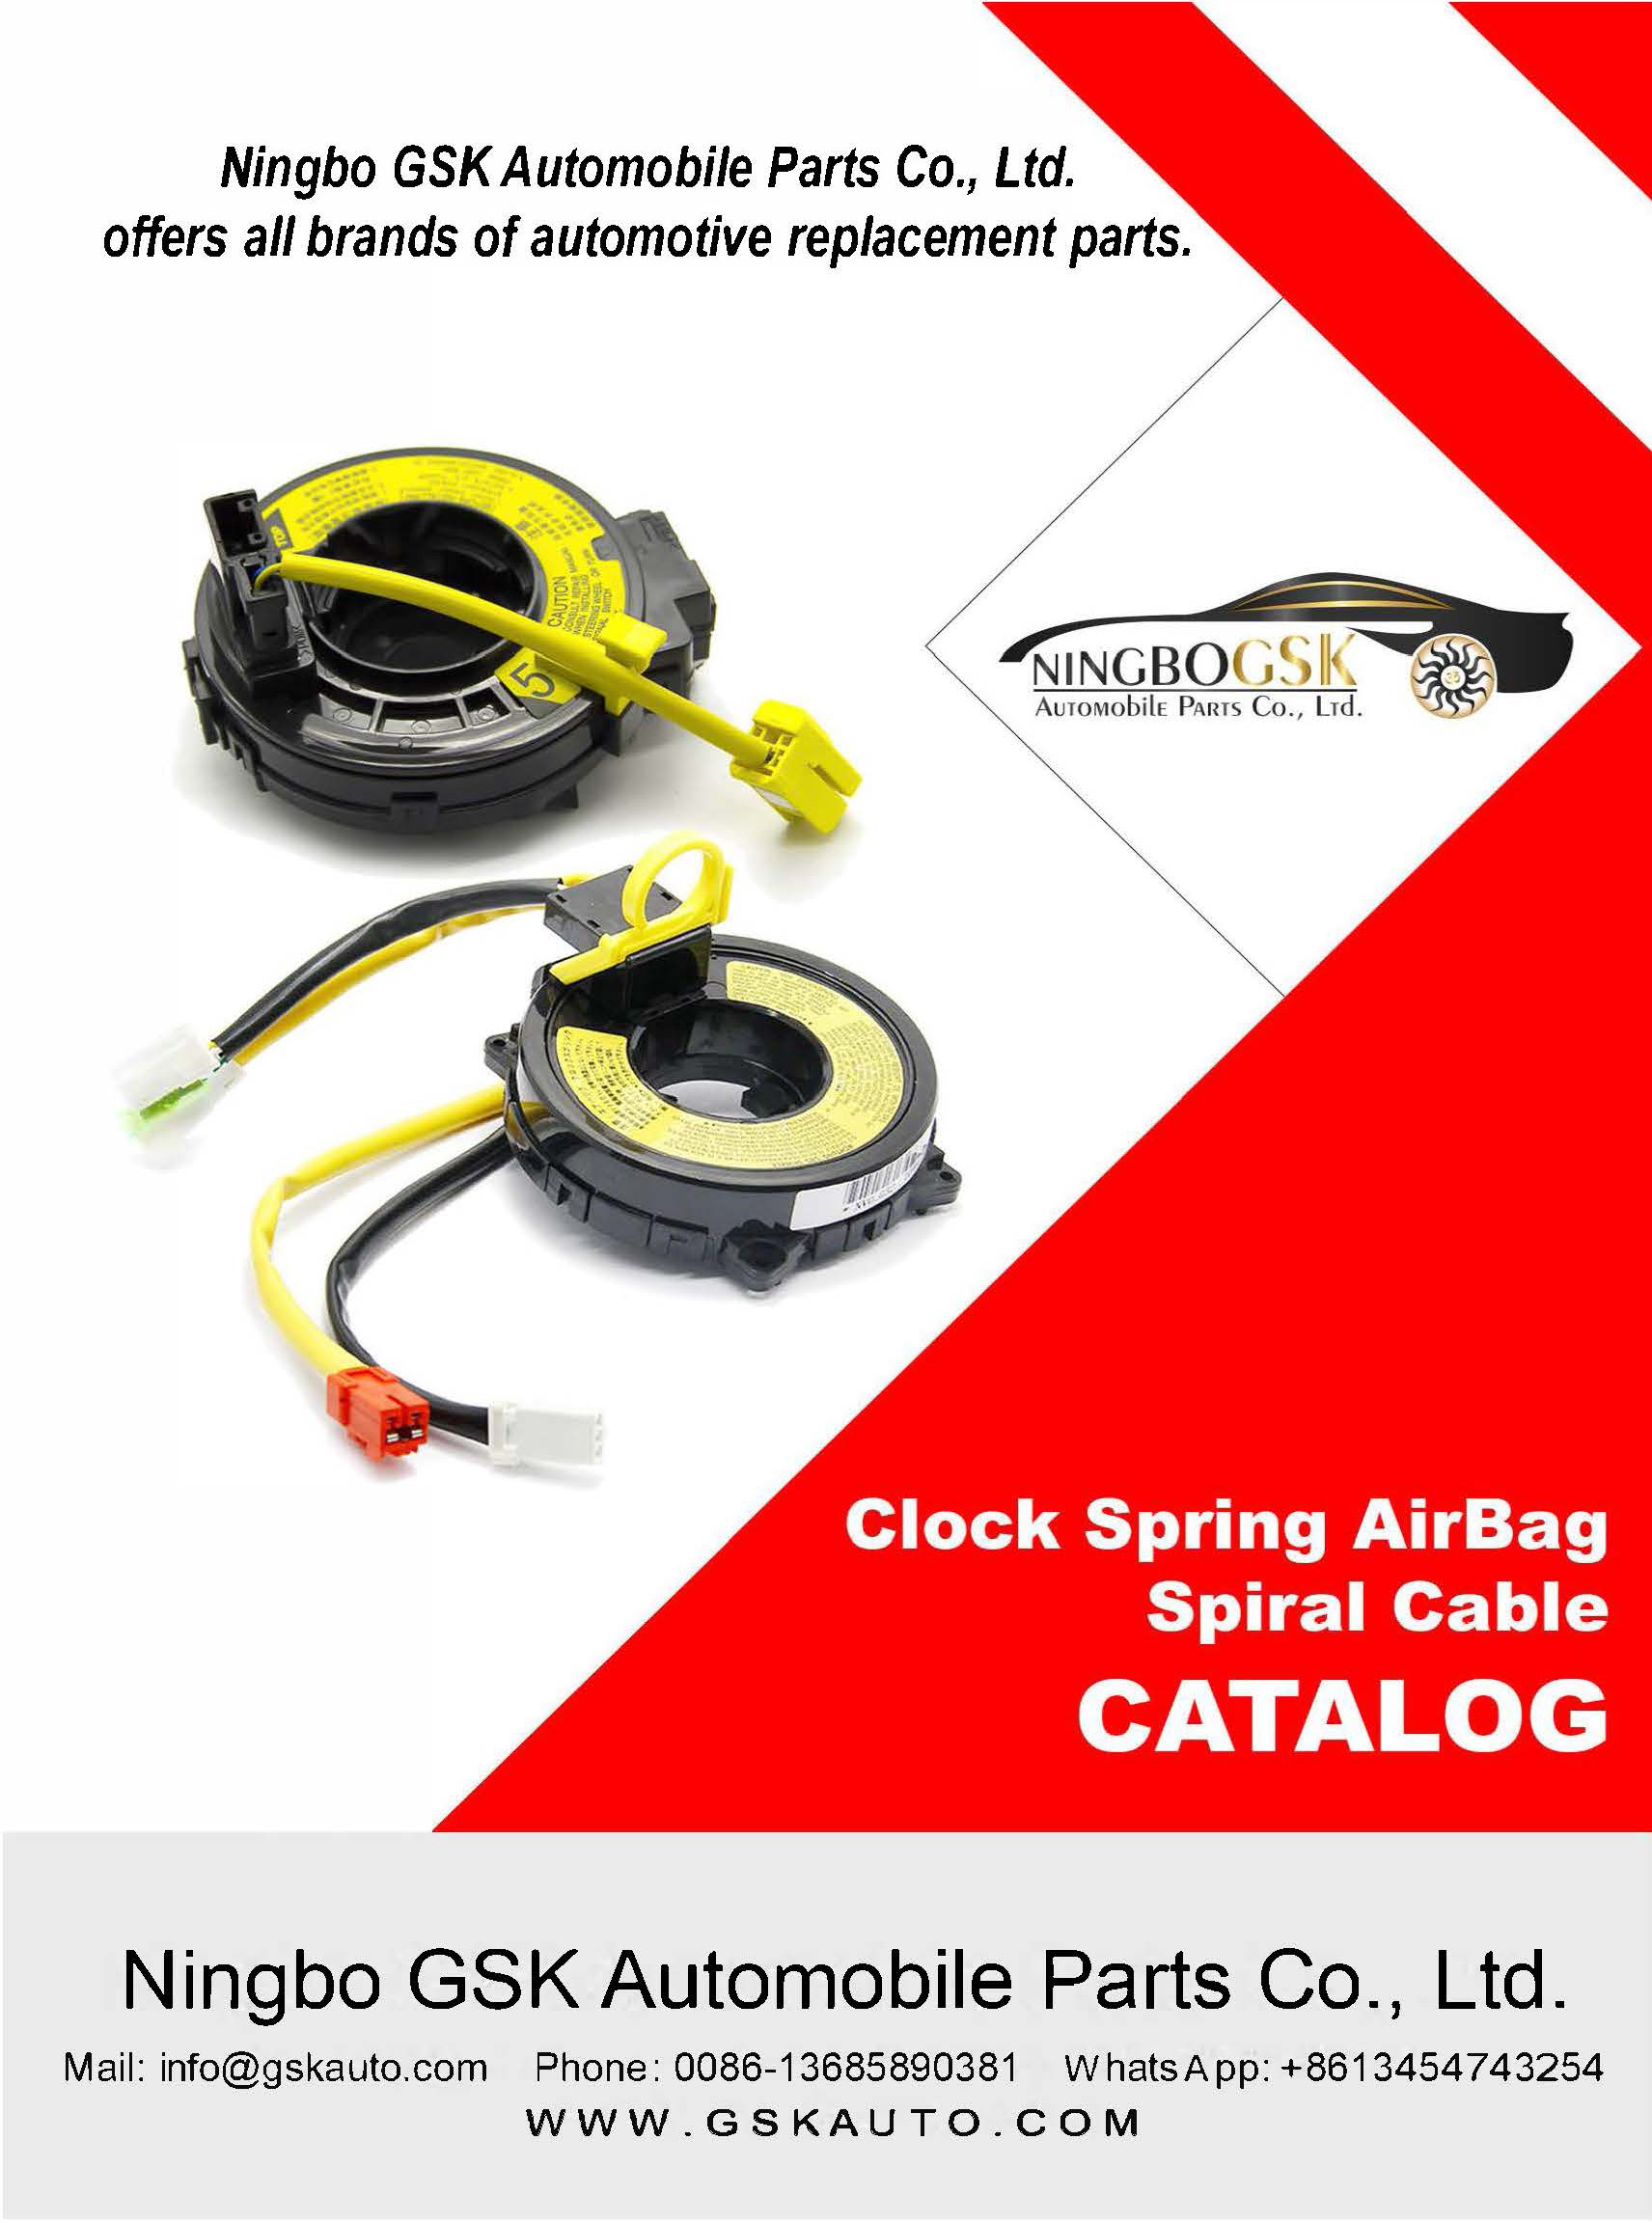 Clock Spring AirBag Spiral Cable Catalog